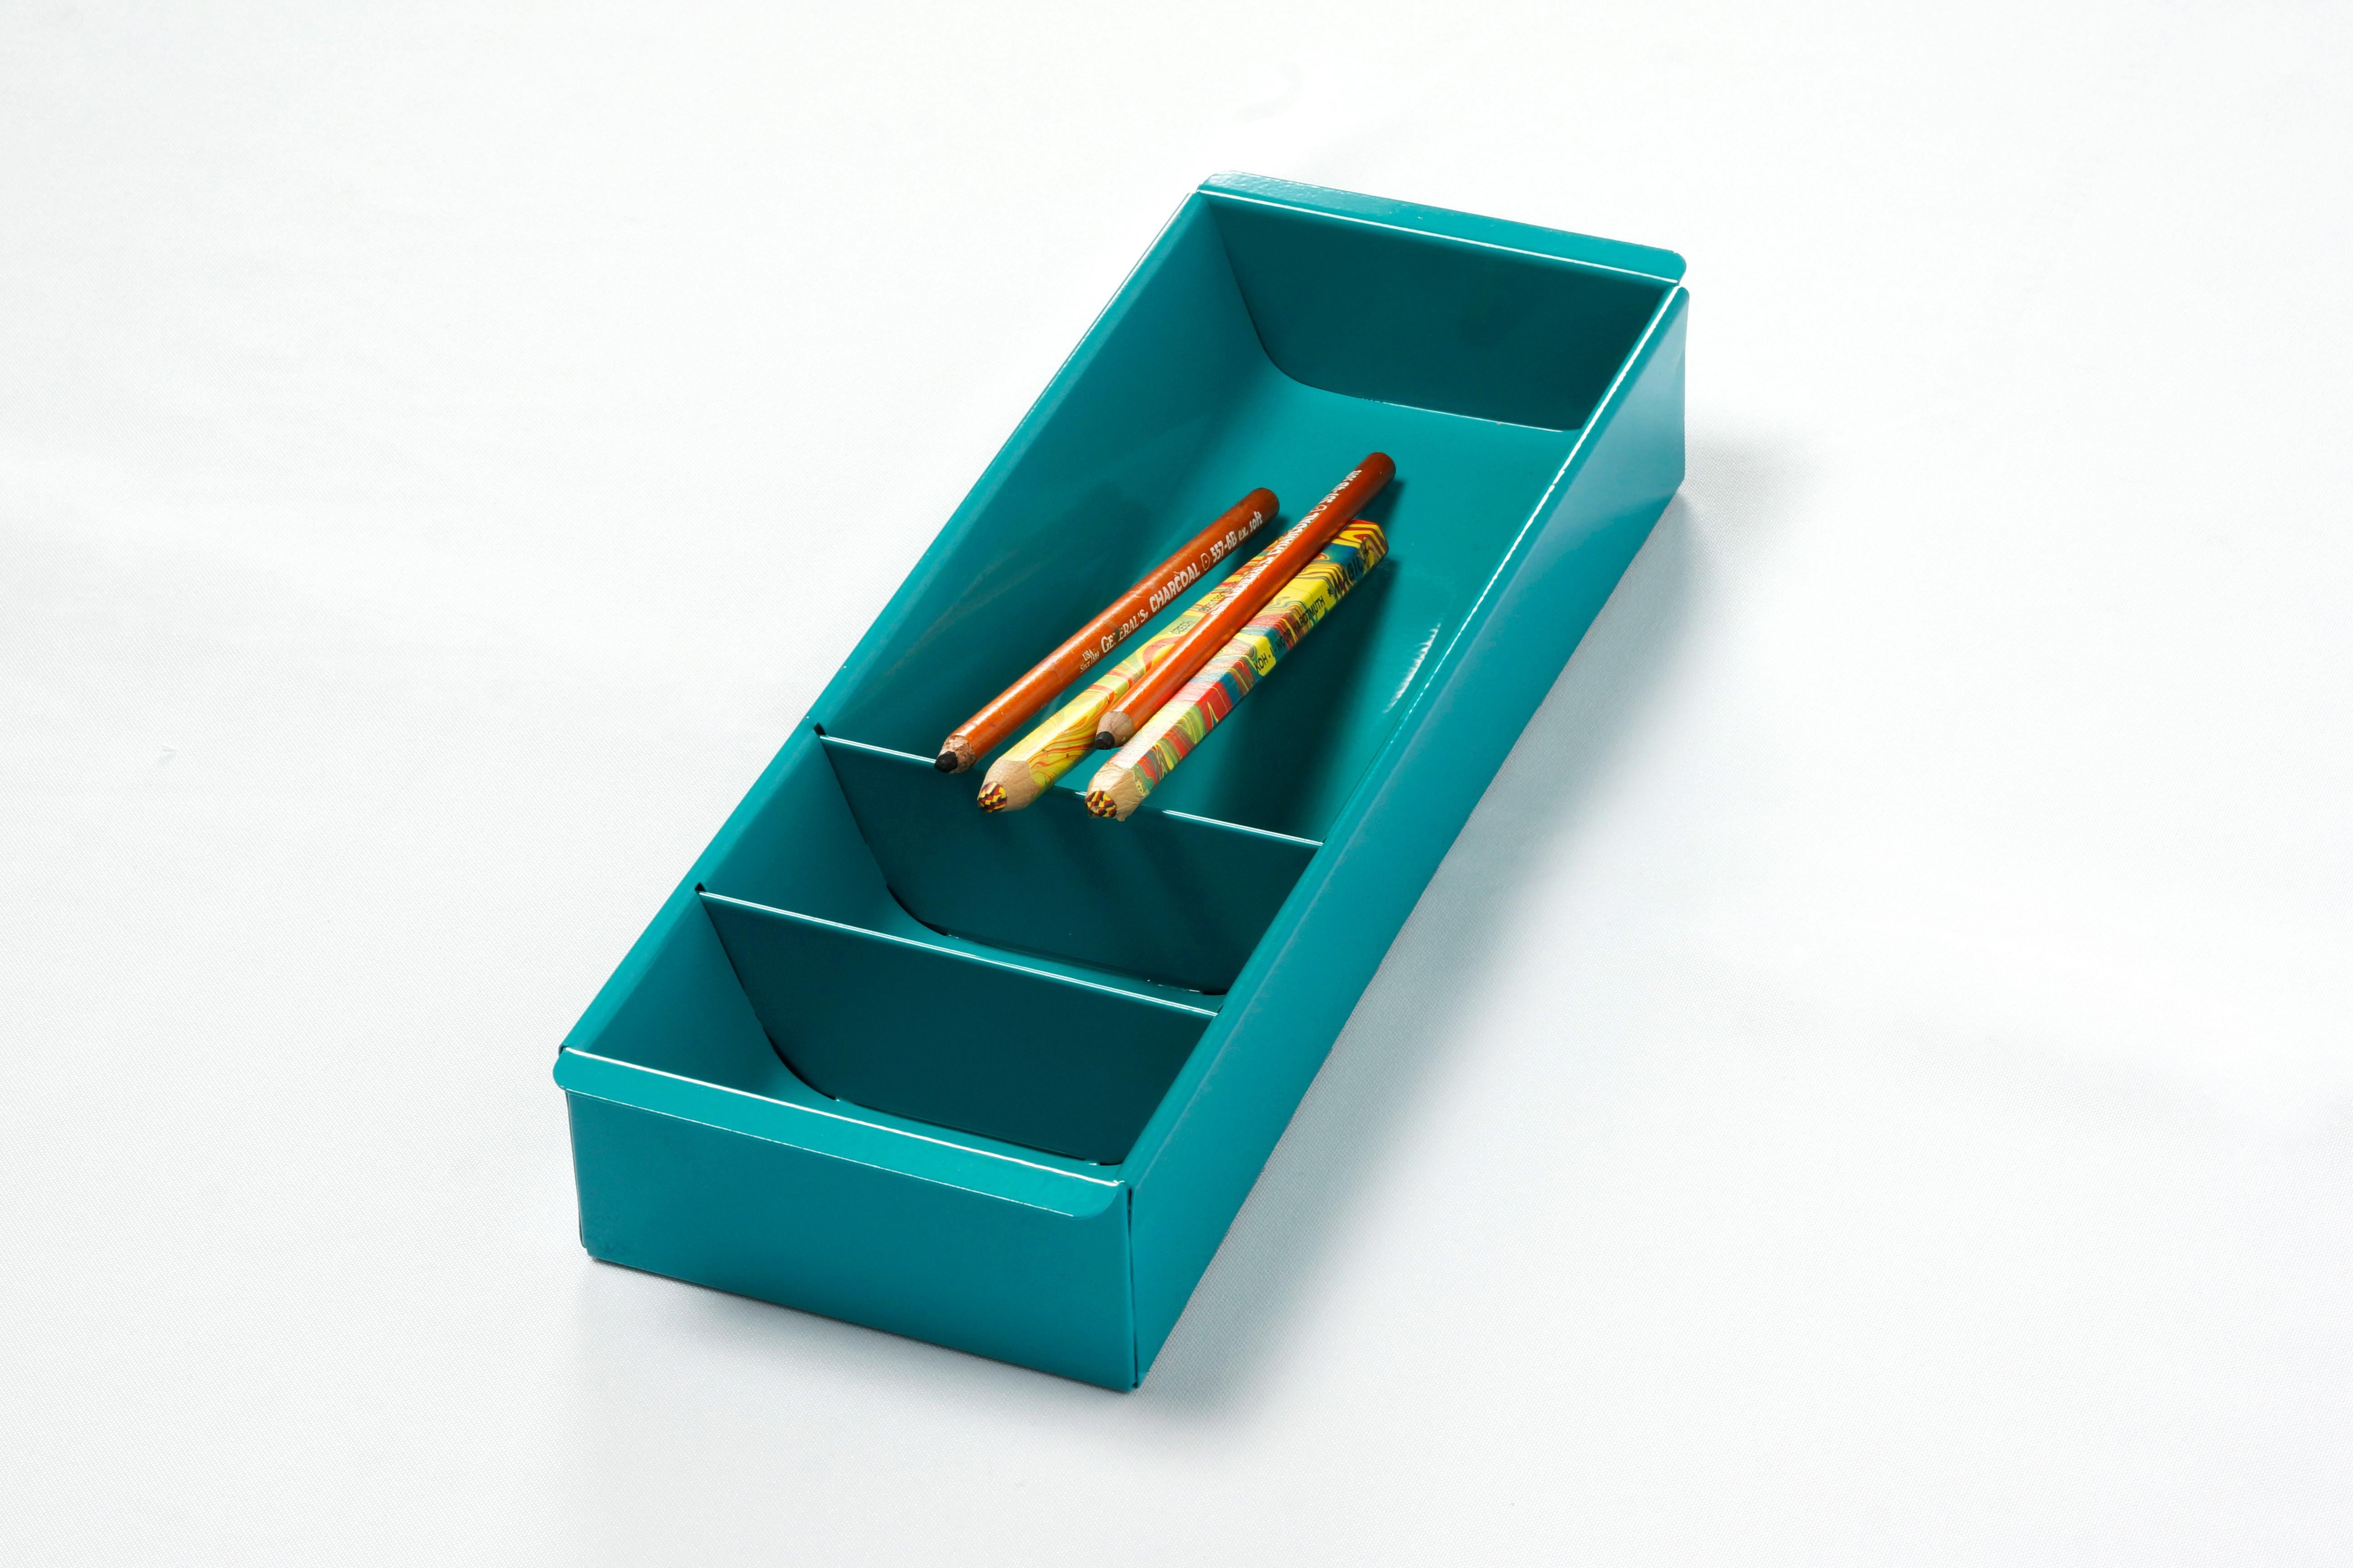 Once the insert to a Classic tanker desk's utility drawer, we repurposed this neat Industrial piece for use as a desktop organizer. Steel has been newly powder-coated in a pop of Turquoise (RAL5018). Features three slots, ideal for storing coins,